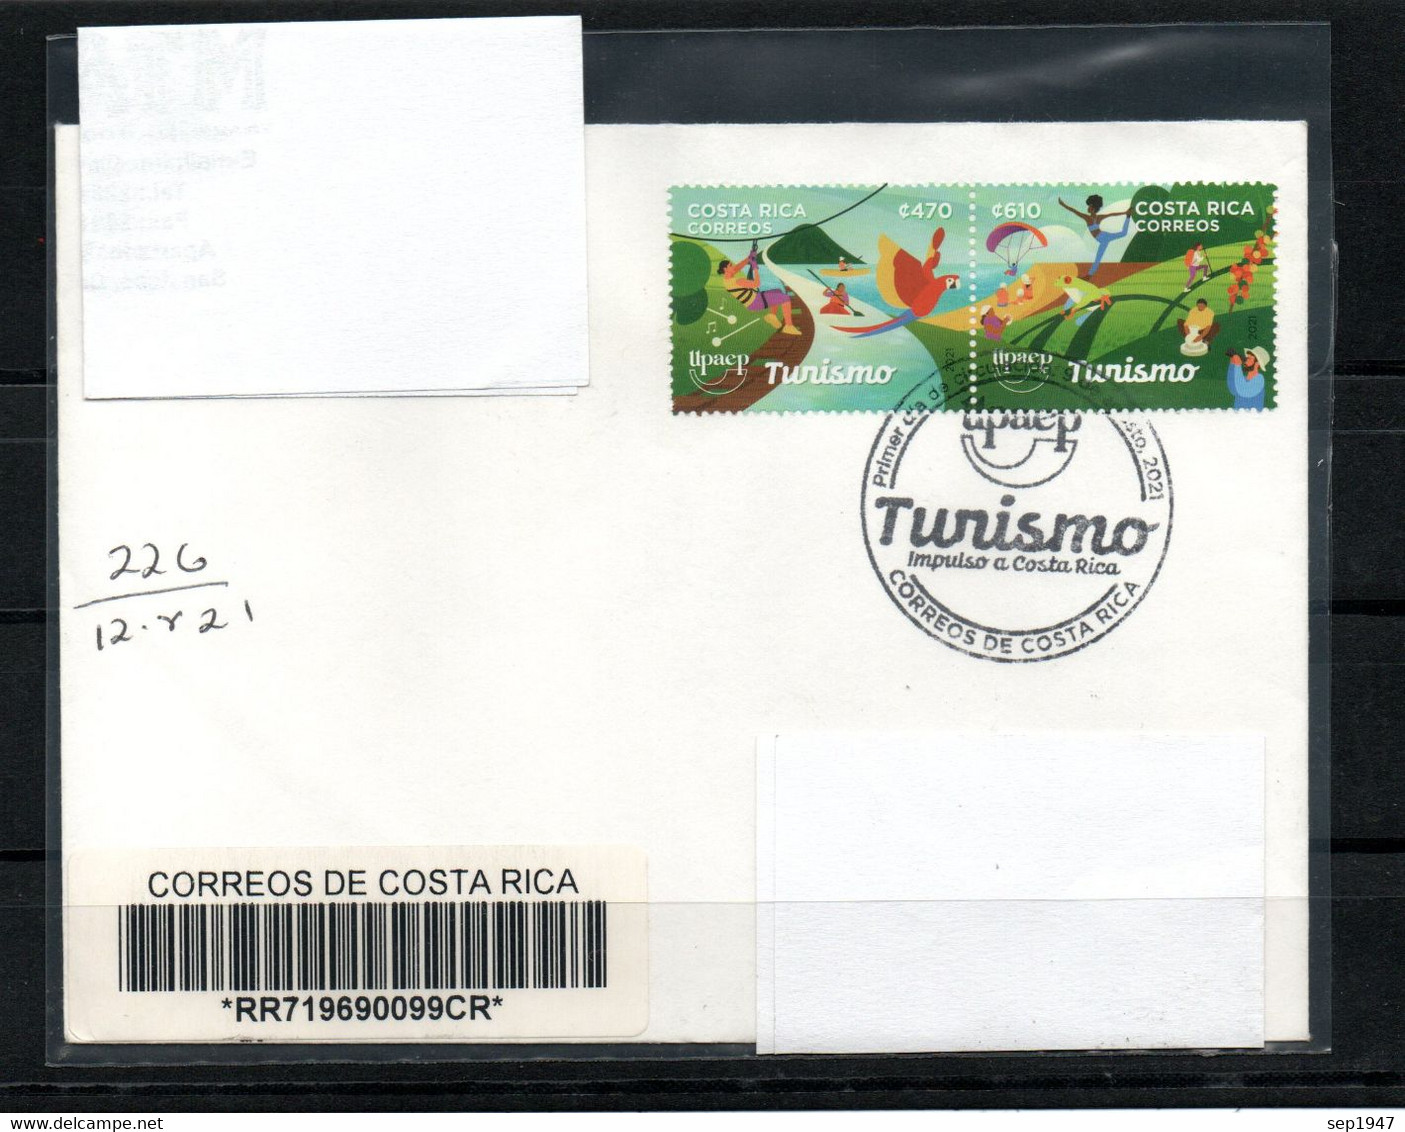 Costa Rica Circulated Cover With America-Upaep Stamps 2021, Tourism, Posted On First Day Of Issue, Very Fine - Costa Rica